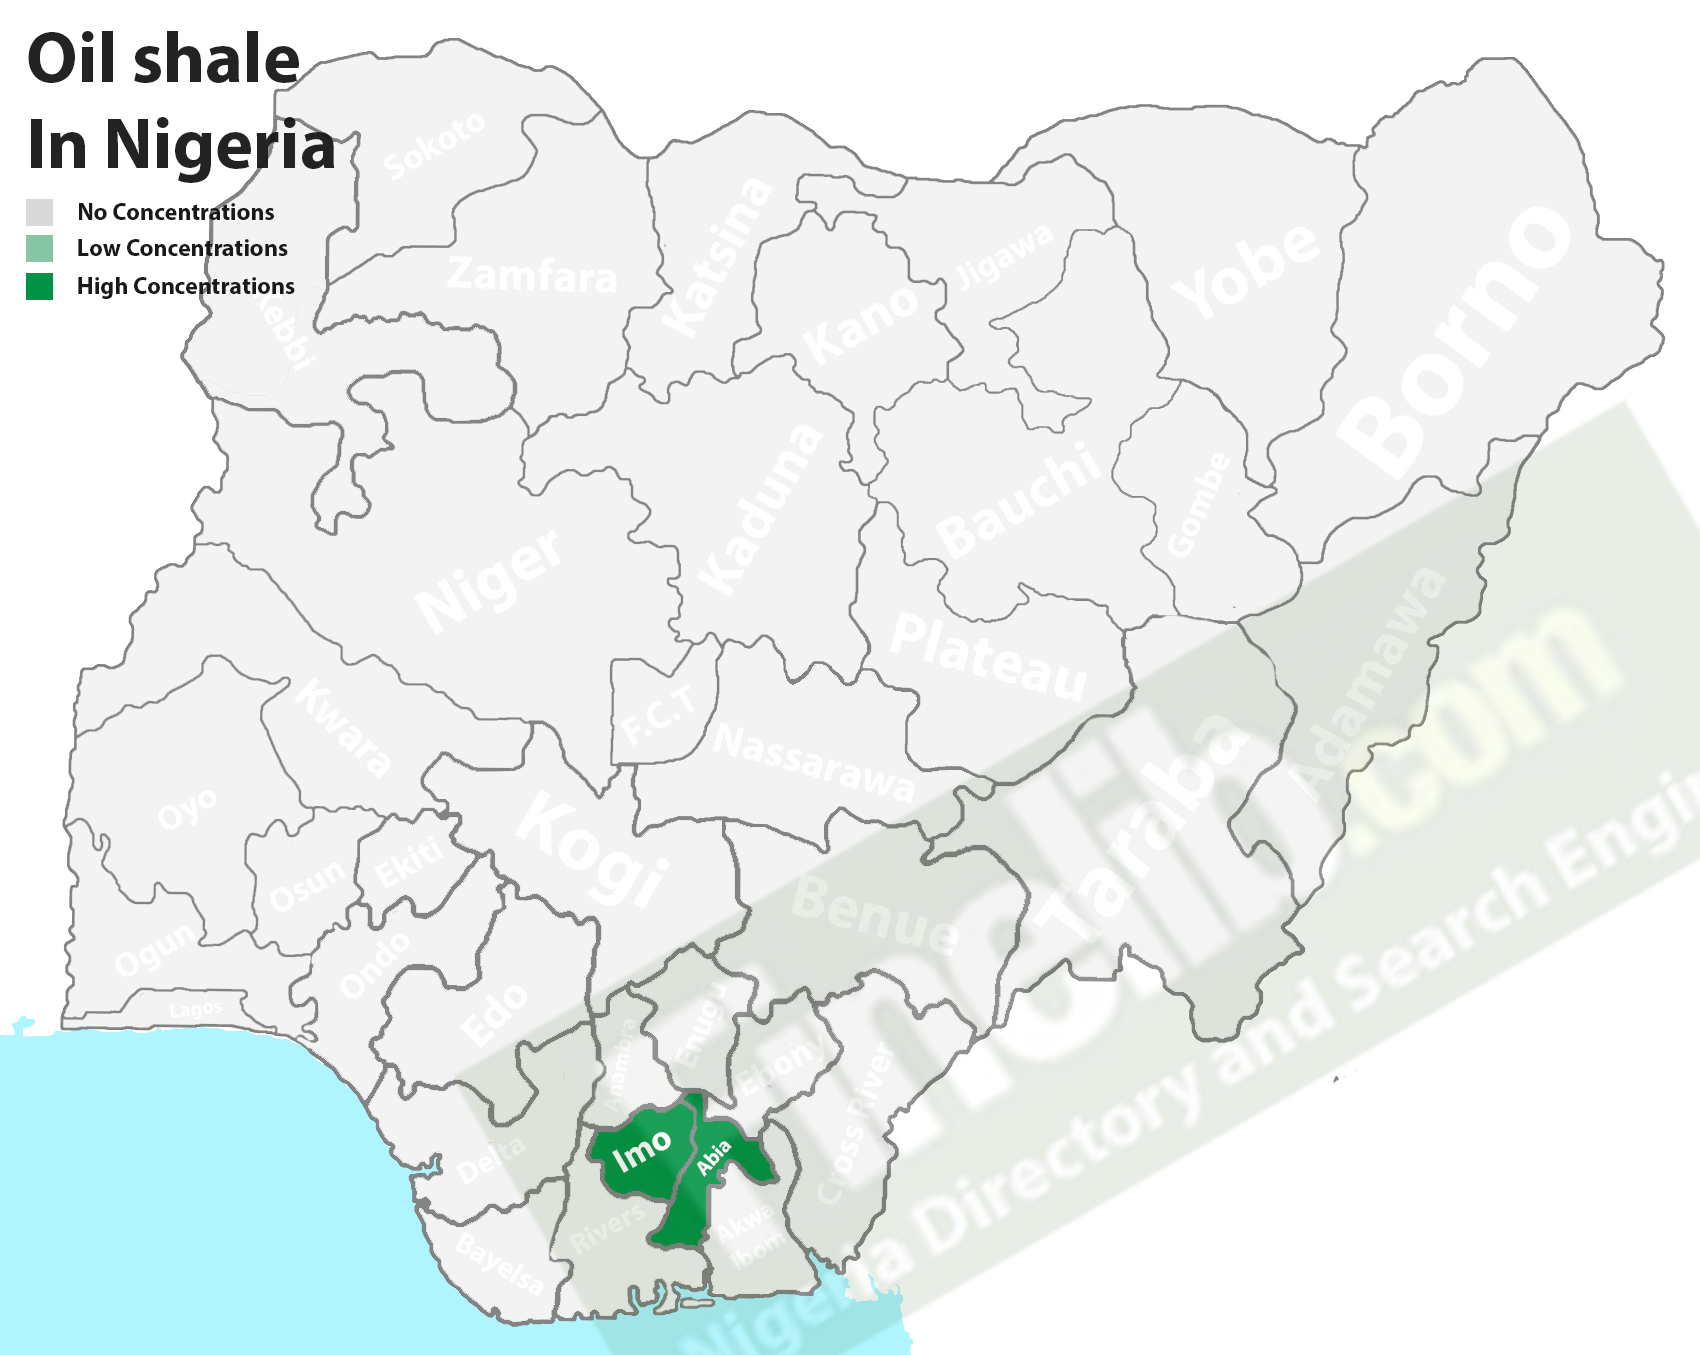 Oil Shales mineral resources in Nigeria